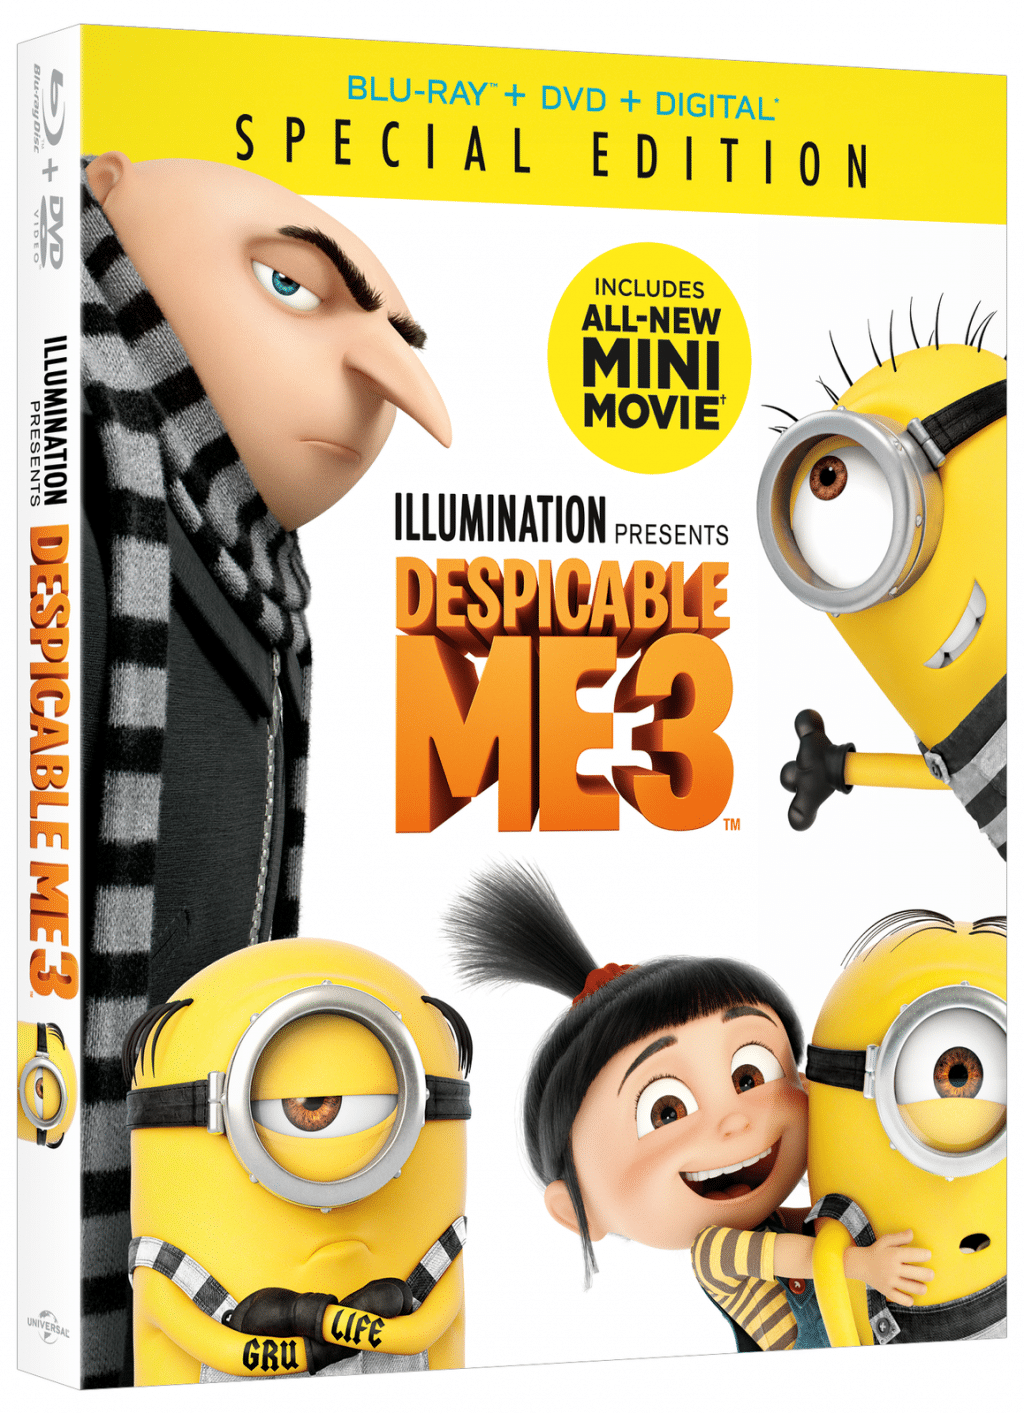 Despicable Me 3 Special Edition Arrives November 21st